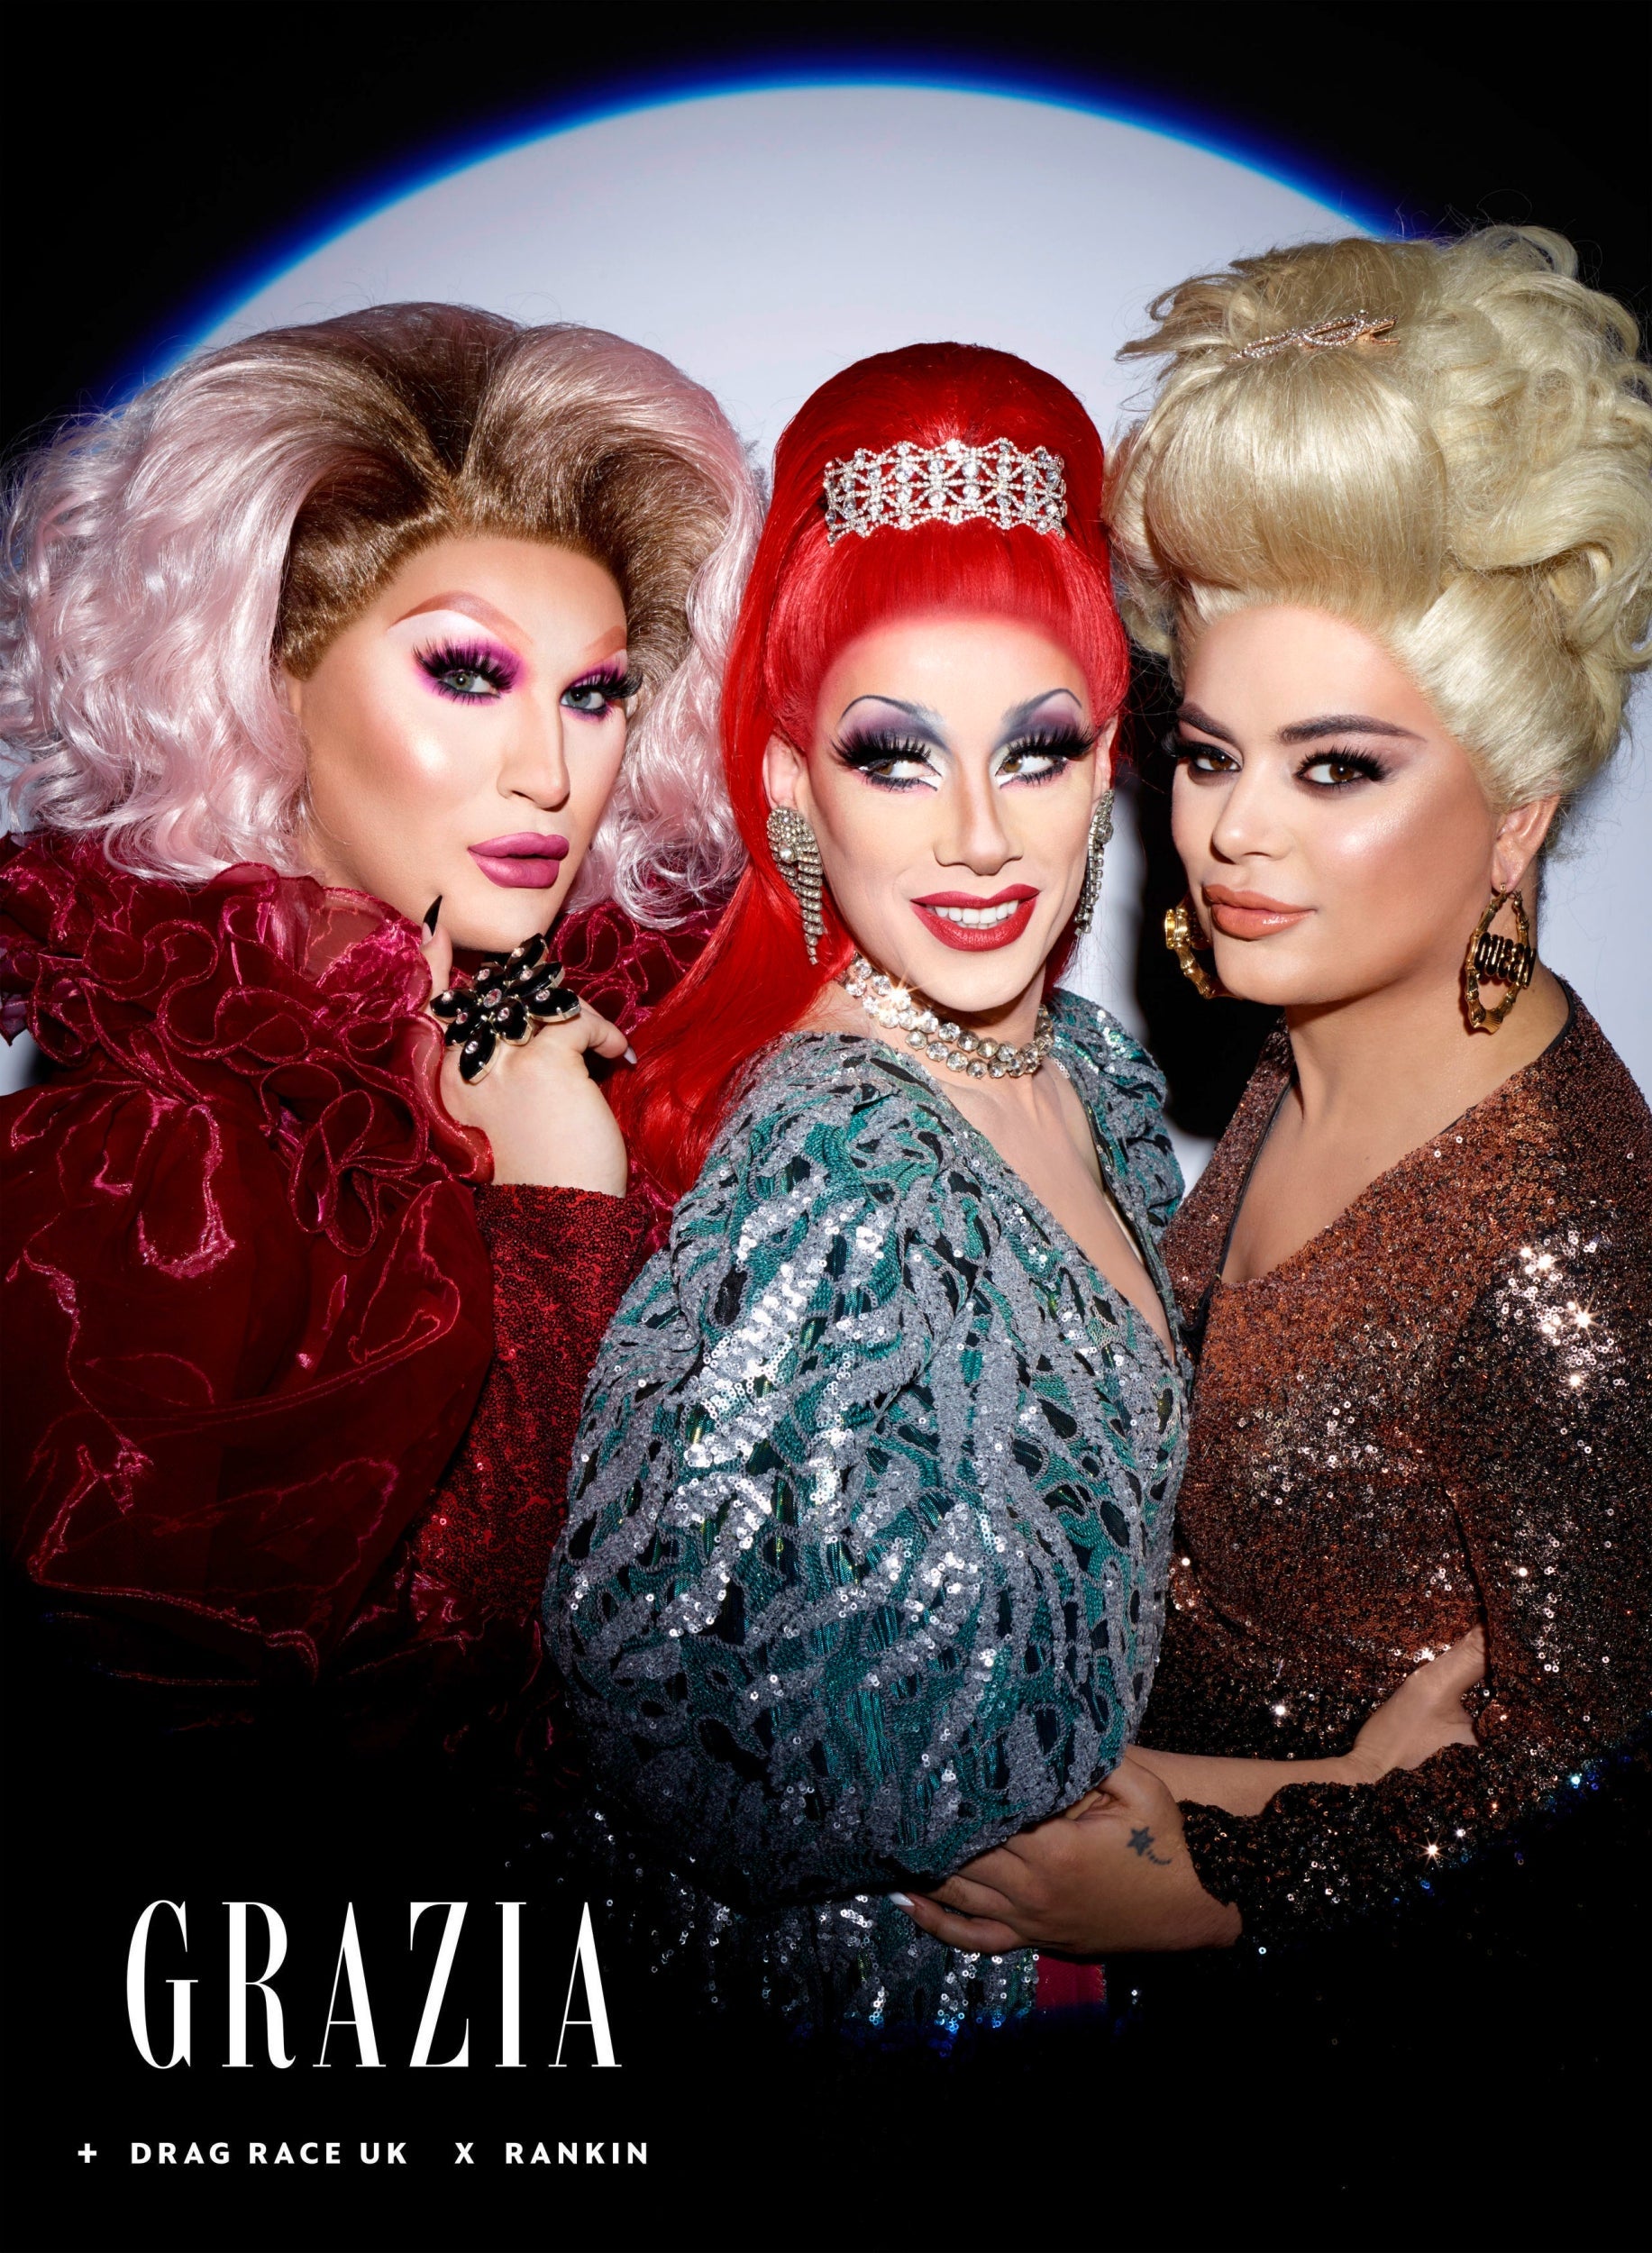 RuPaul’s Drag Race UK finalists (left to right) The Vivienne, Divina De Campo and Baga Chipz MBE